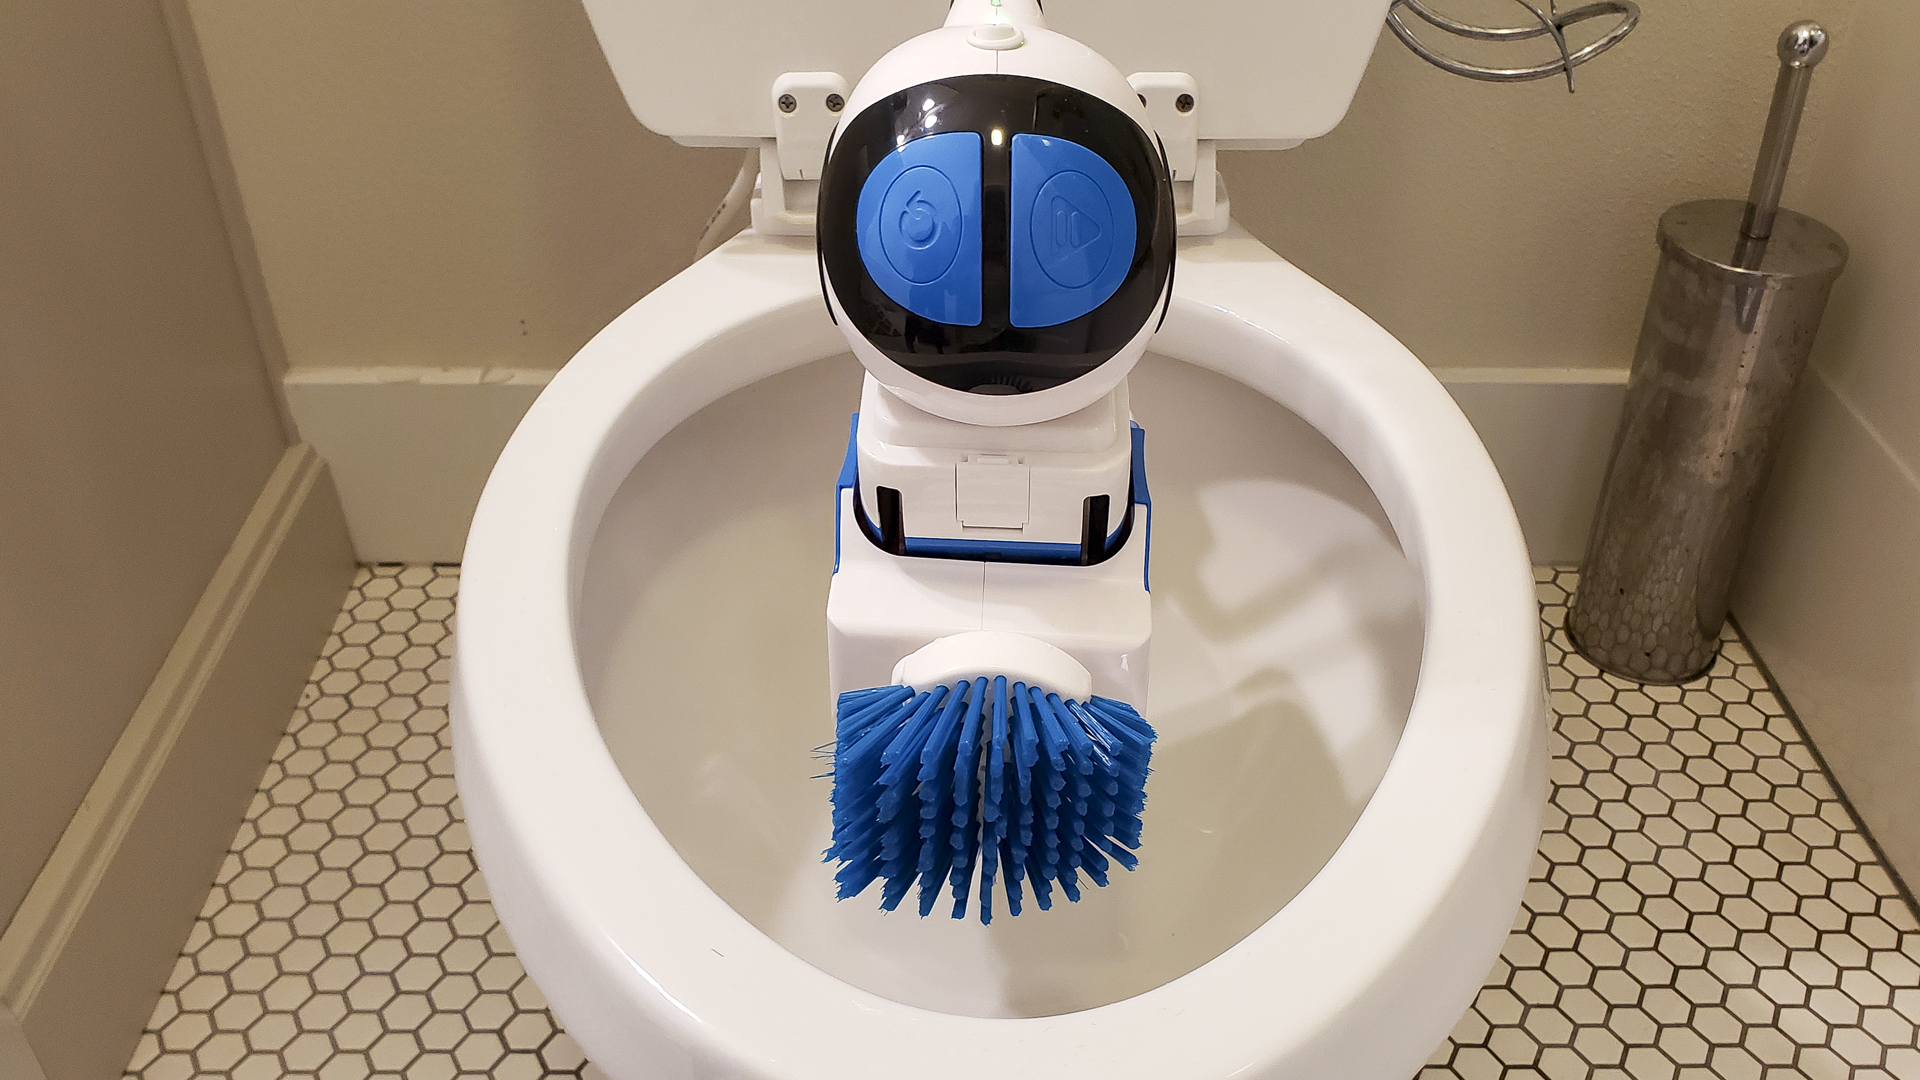 10 Toilet Cleaning Hacks That Make a Dirty Job So Much Easier